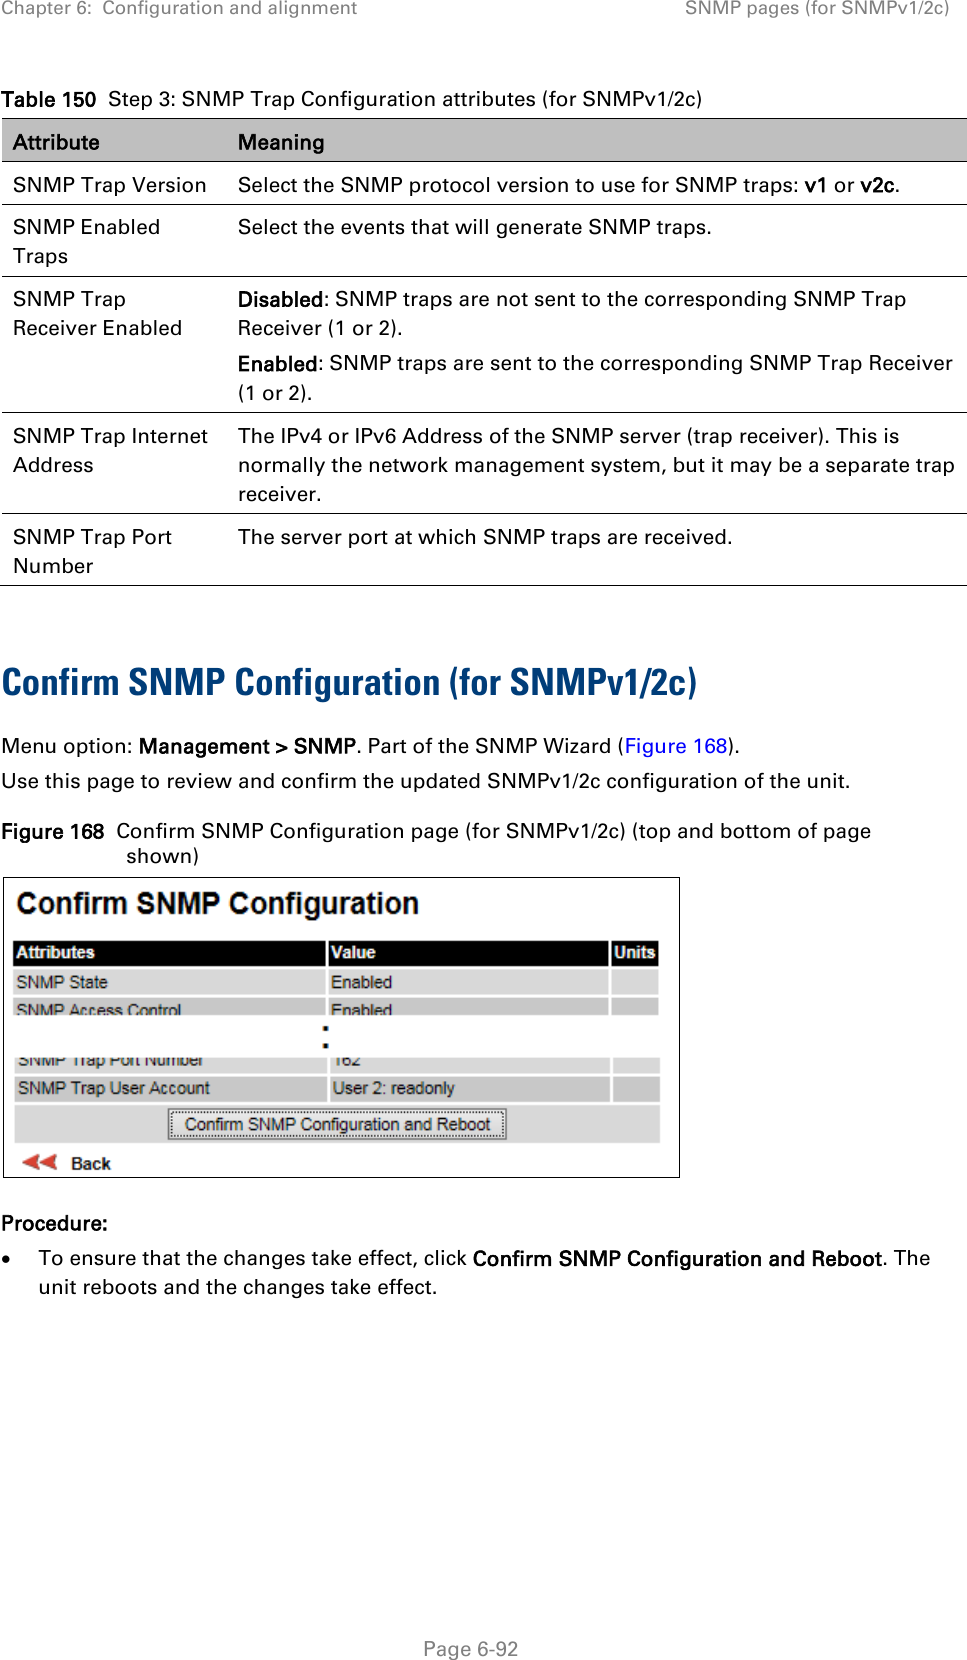 Chapter 6:  Configuration and alignment SNMP pages (for SNMPv1/2c)  Table 150  Step 3: SNMP Trap Configuration attributes (for SNMPv1/2c) Attribute Meaning SNMP Trap Version Select the SNMP protocol version to use for SNMP traps: v1 or v2c. SNMP Enabled Traps Select the events that will generate SNMP traps. SNMP Trap Receiver Enabled Disabled: SNMP traps are not sent to the corresponding SNMP Trap Receiver (1 or 2). Enabled: SNMP traps are sent to the corresponding SNMP Trap Receiver (1 or 2). SNMP Trap Internet Address The IPv4 or IPv6 Address of the SNMP server (trap receiver). This is normally the network management system, but it may be a separate trap receiver. SNMP Trap Port Number The server port at which SNMP traps are received.  Confirm SNMP Configuration (for SNMPv1/2c)  Menu option: Management &gt; SNMP. Part of the SNMP Wizard (Figure 168). Use this page to review and confirm the updated SNMPv1/2c configuration of the unit. Figure 168  Confirm SNMP Configuration page (for SNMPv1/2c) (top and bottom of page shown)  Procedure: • To ensure that the changes take effect, click Confirm SNMP Configuration and Reboot. The unit reboots and the changes take effect.   Page 6-92 